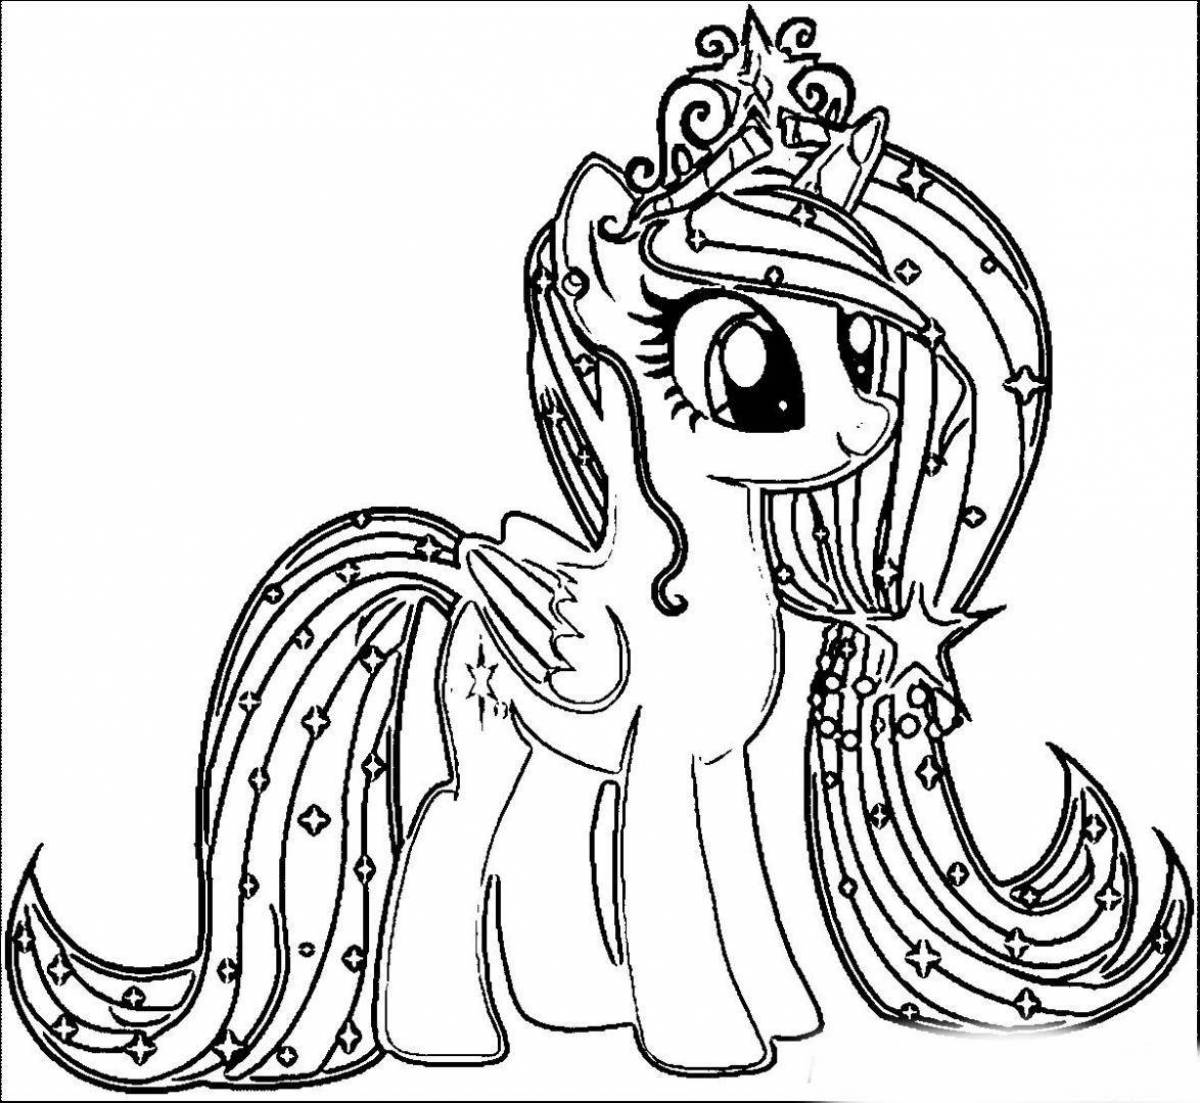 Awesome pony coloring book